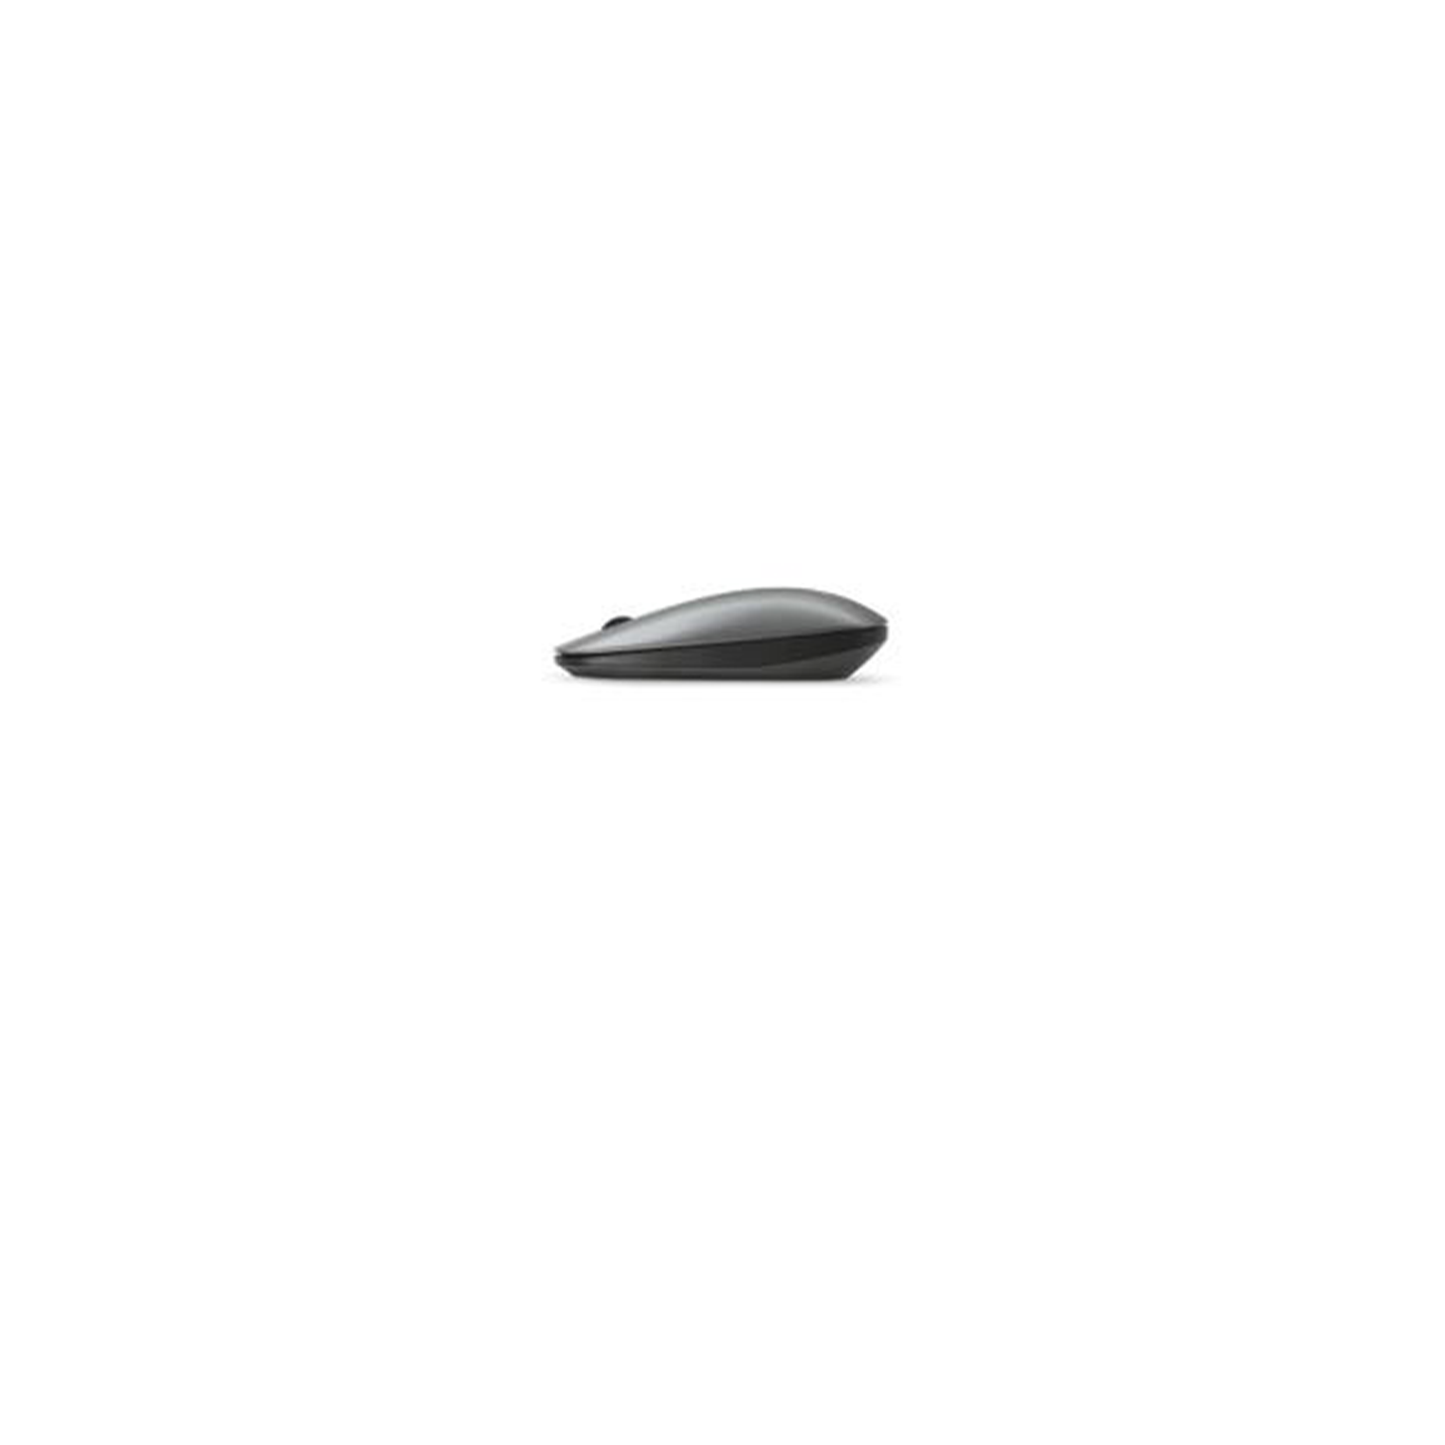 Acer Wireless Optical Slim Mouse